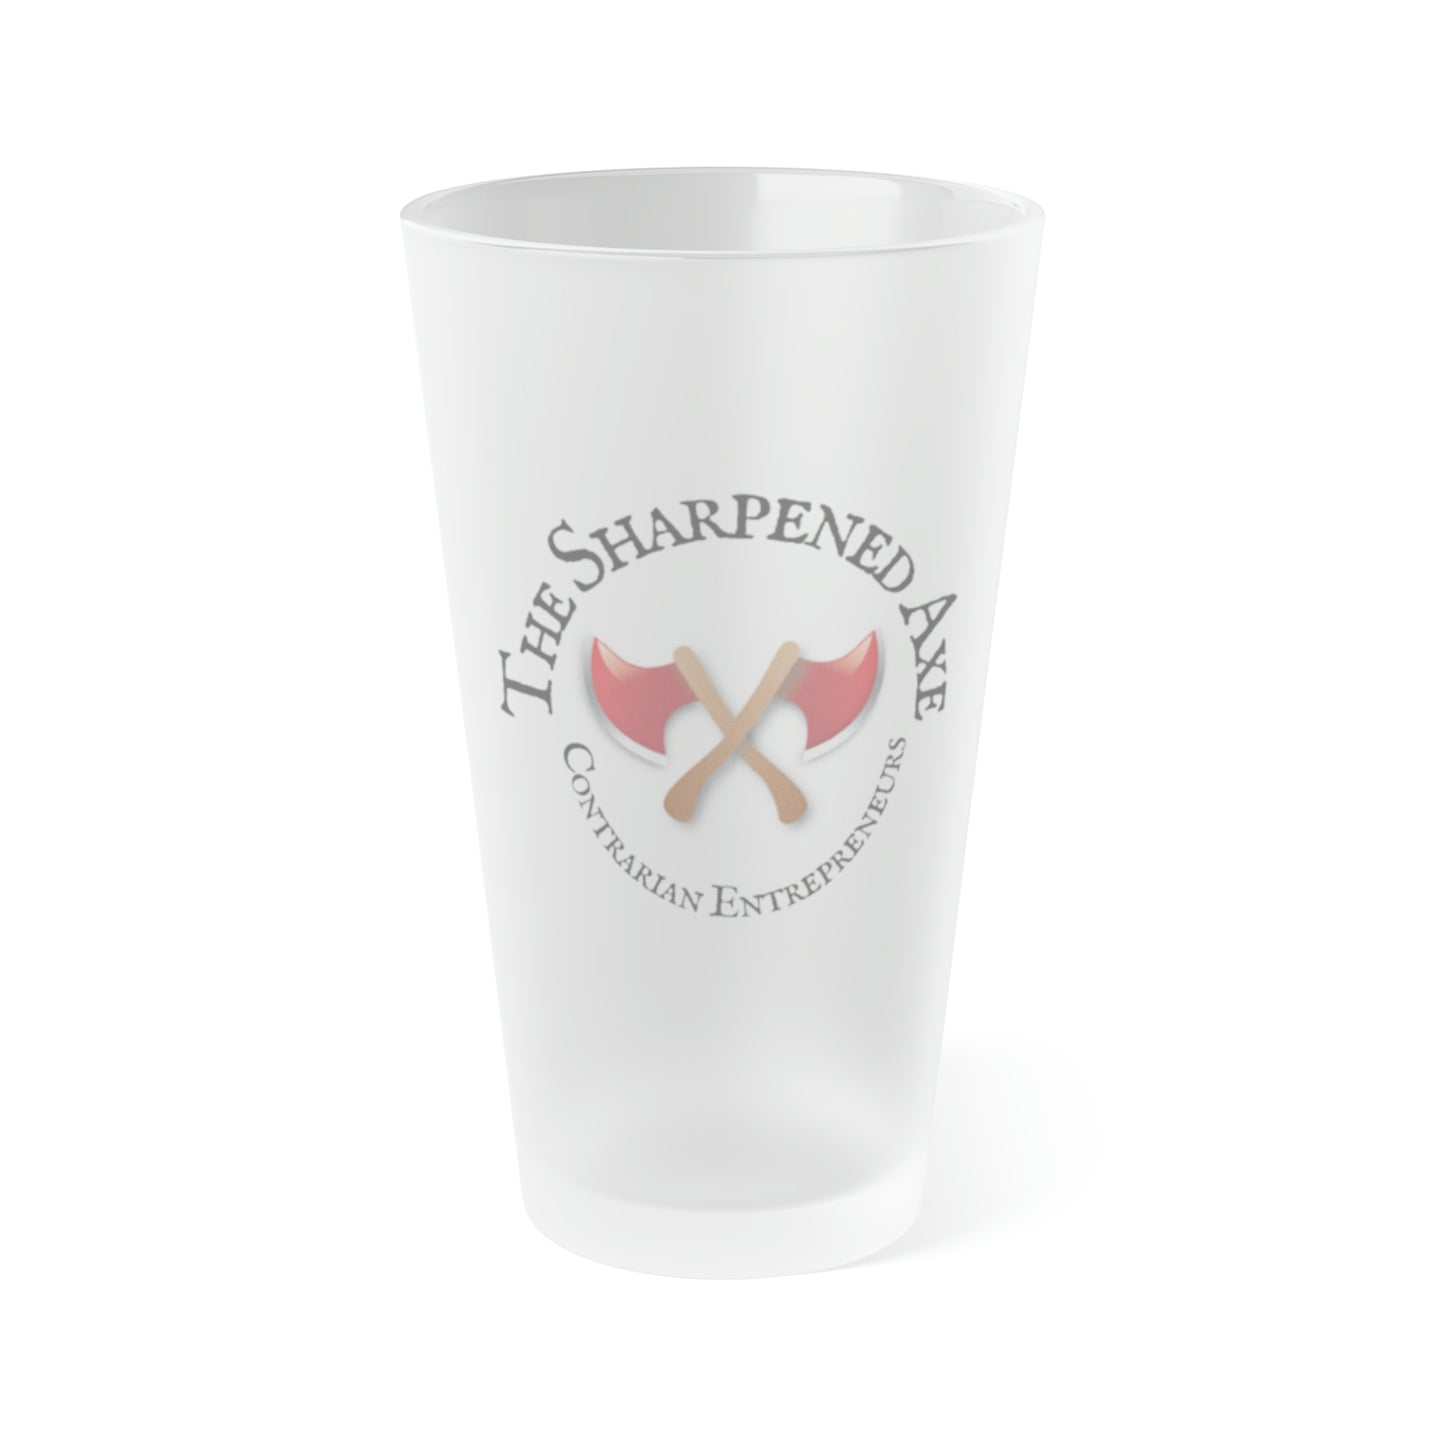 The Sharpened Axe "Contrarian Entrepreneurs" Frosted Pint Glass, 16oz